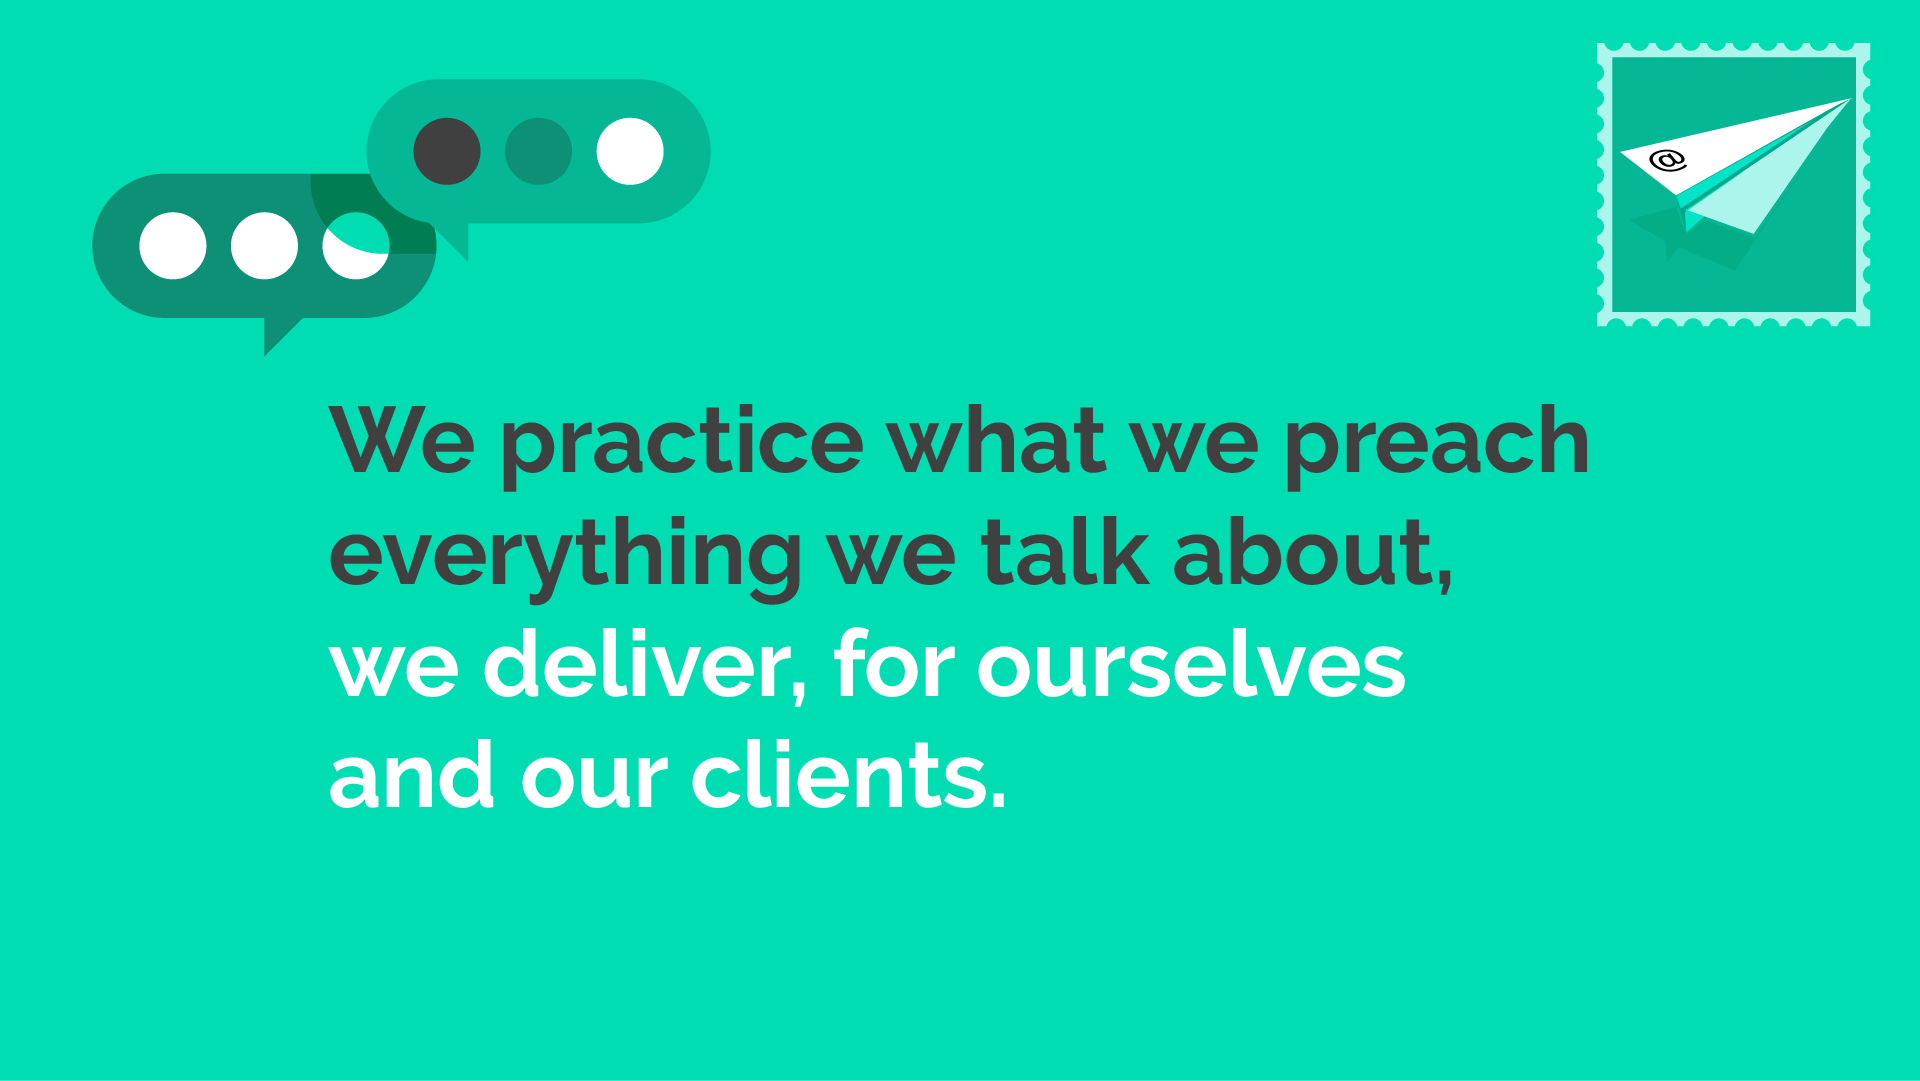 We practice what we preach everything we talk about, we deliver, for ourselves and our clients.